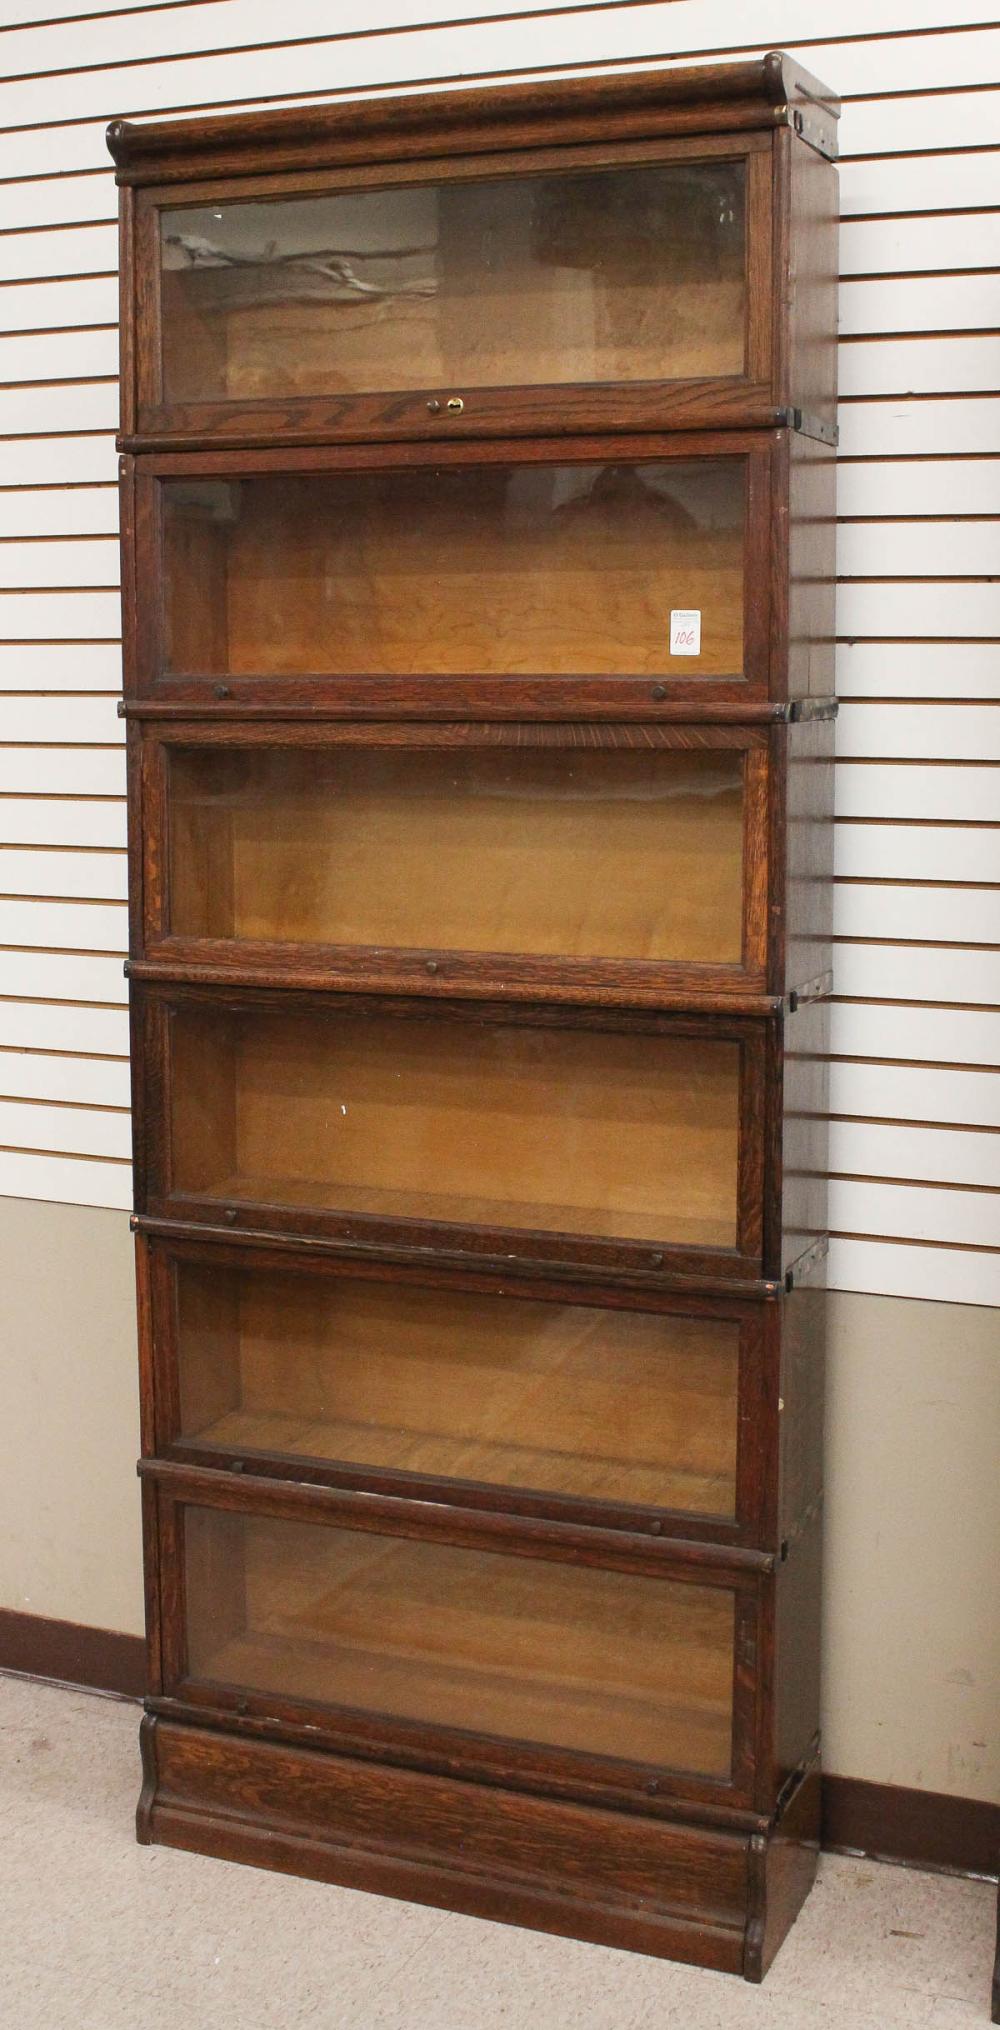 SIX SECTION STACKING OAK BOOKCASESIX SECTION 341ead